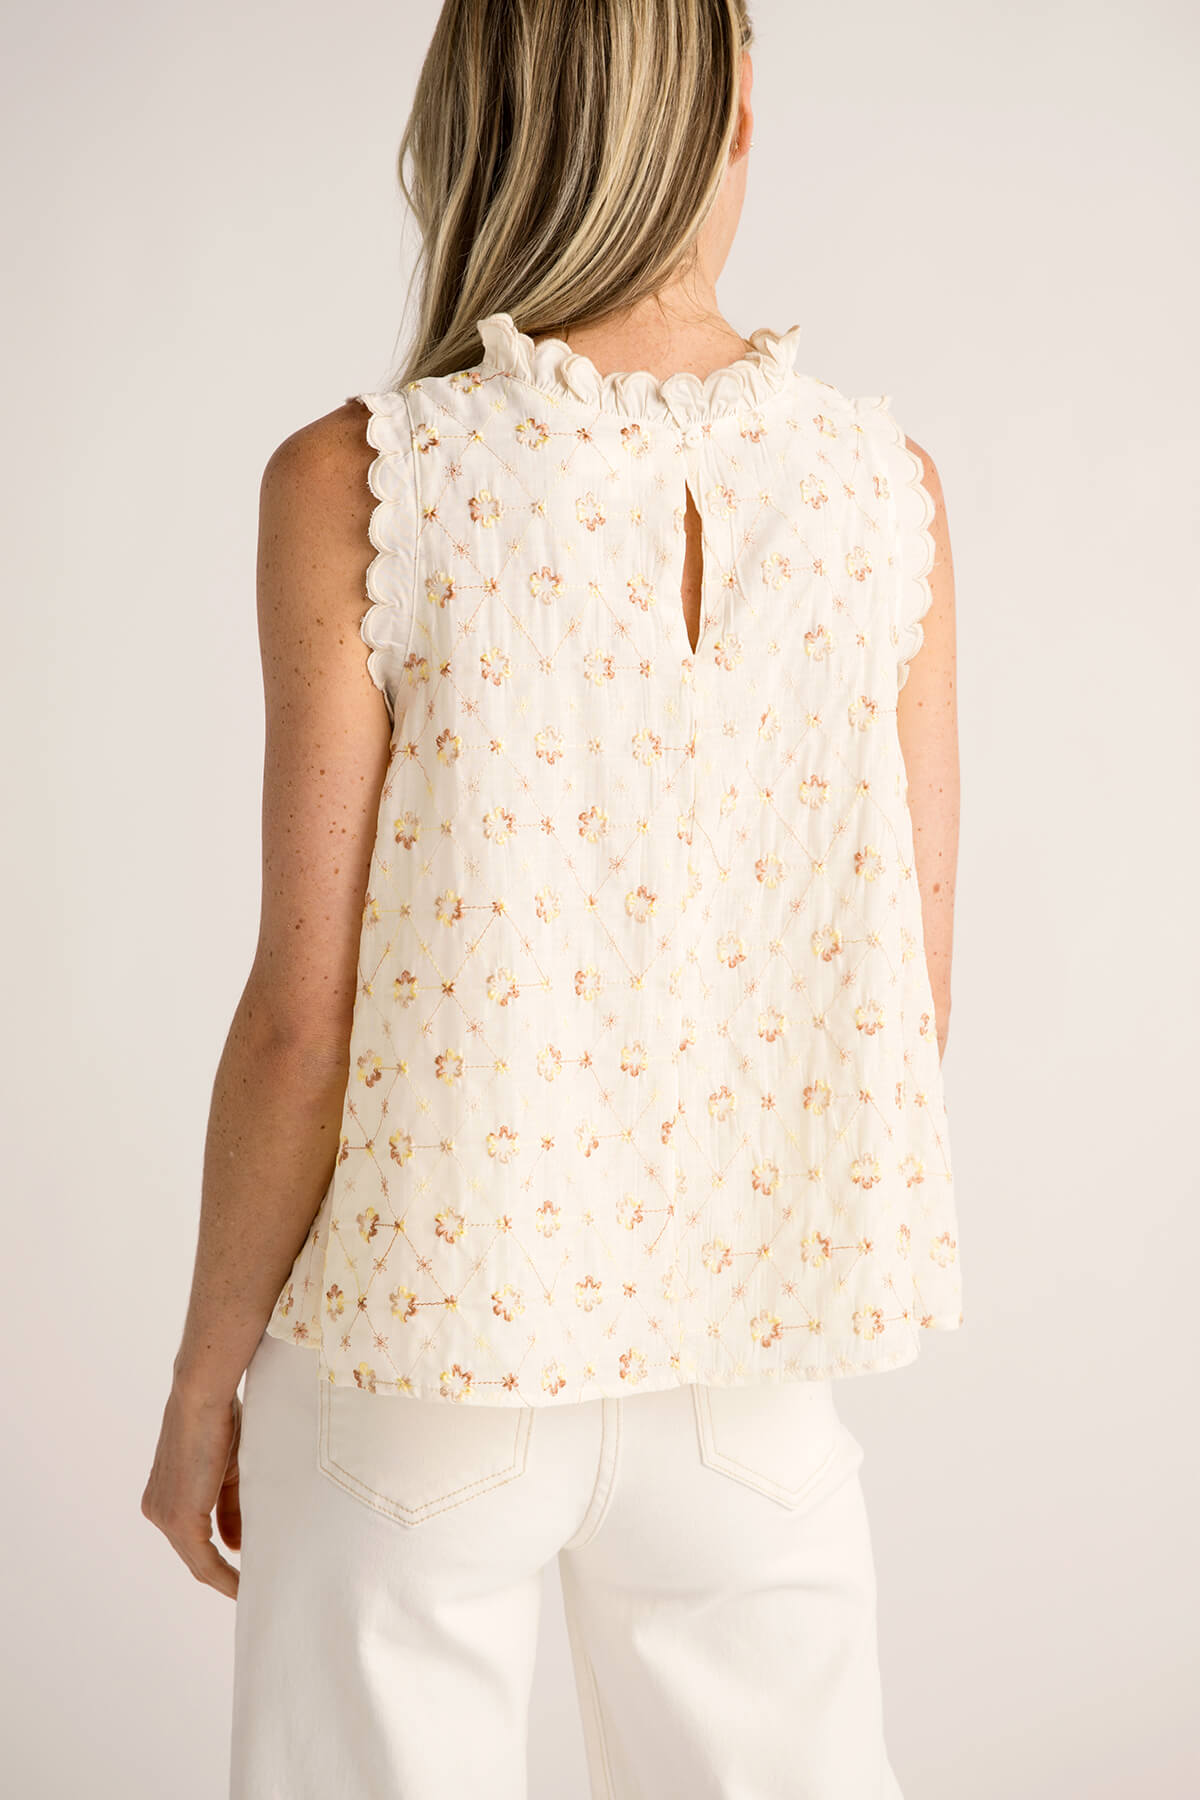 &Merci Floral Embroidered Scalloped Top